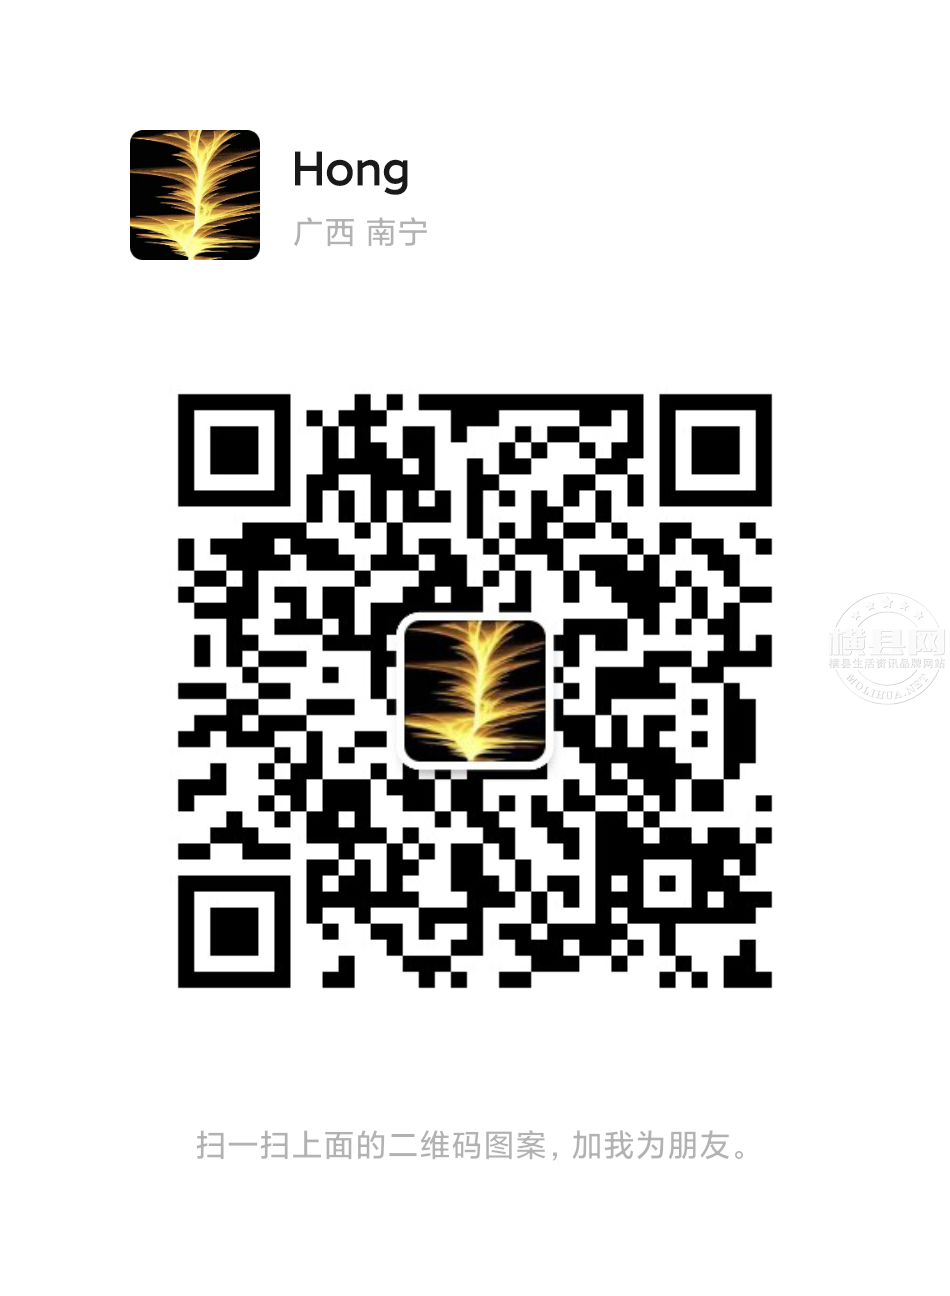 wechat_upload171367068266248a1acd20c